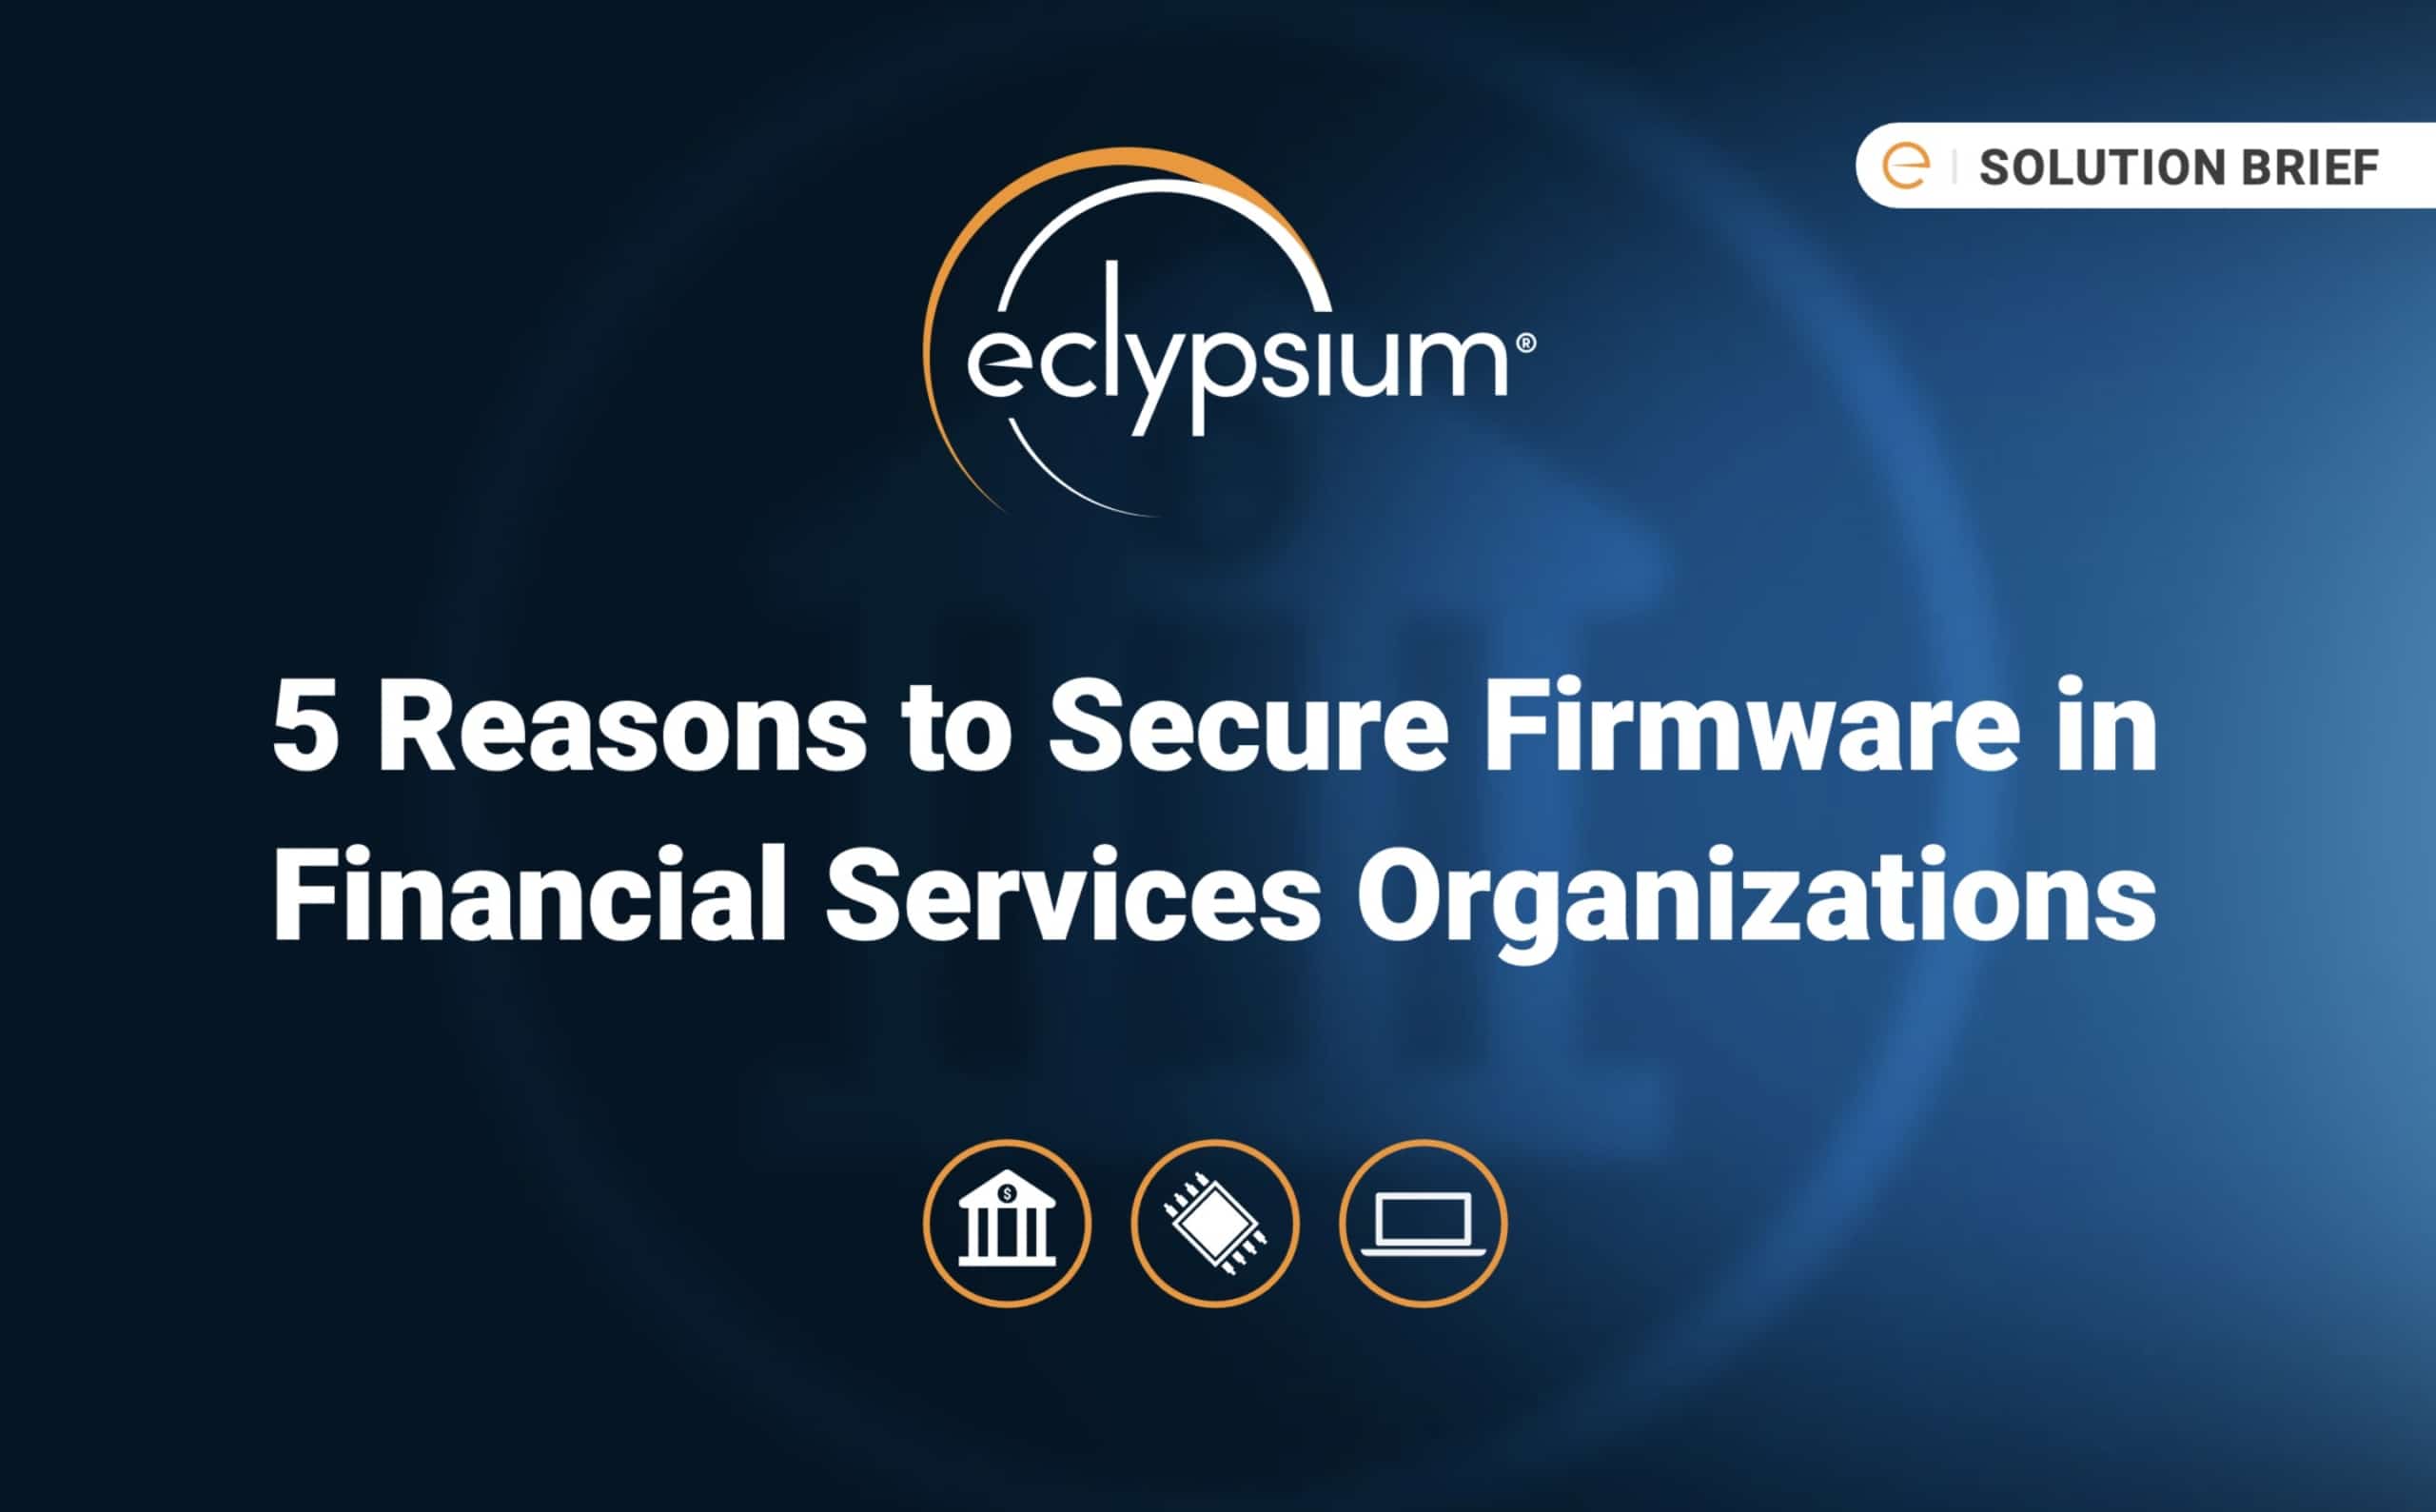 Eclypsium 5 reasons to secure firmware in financial services organizations